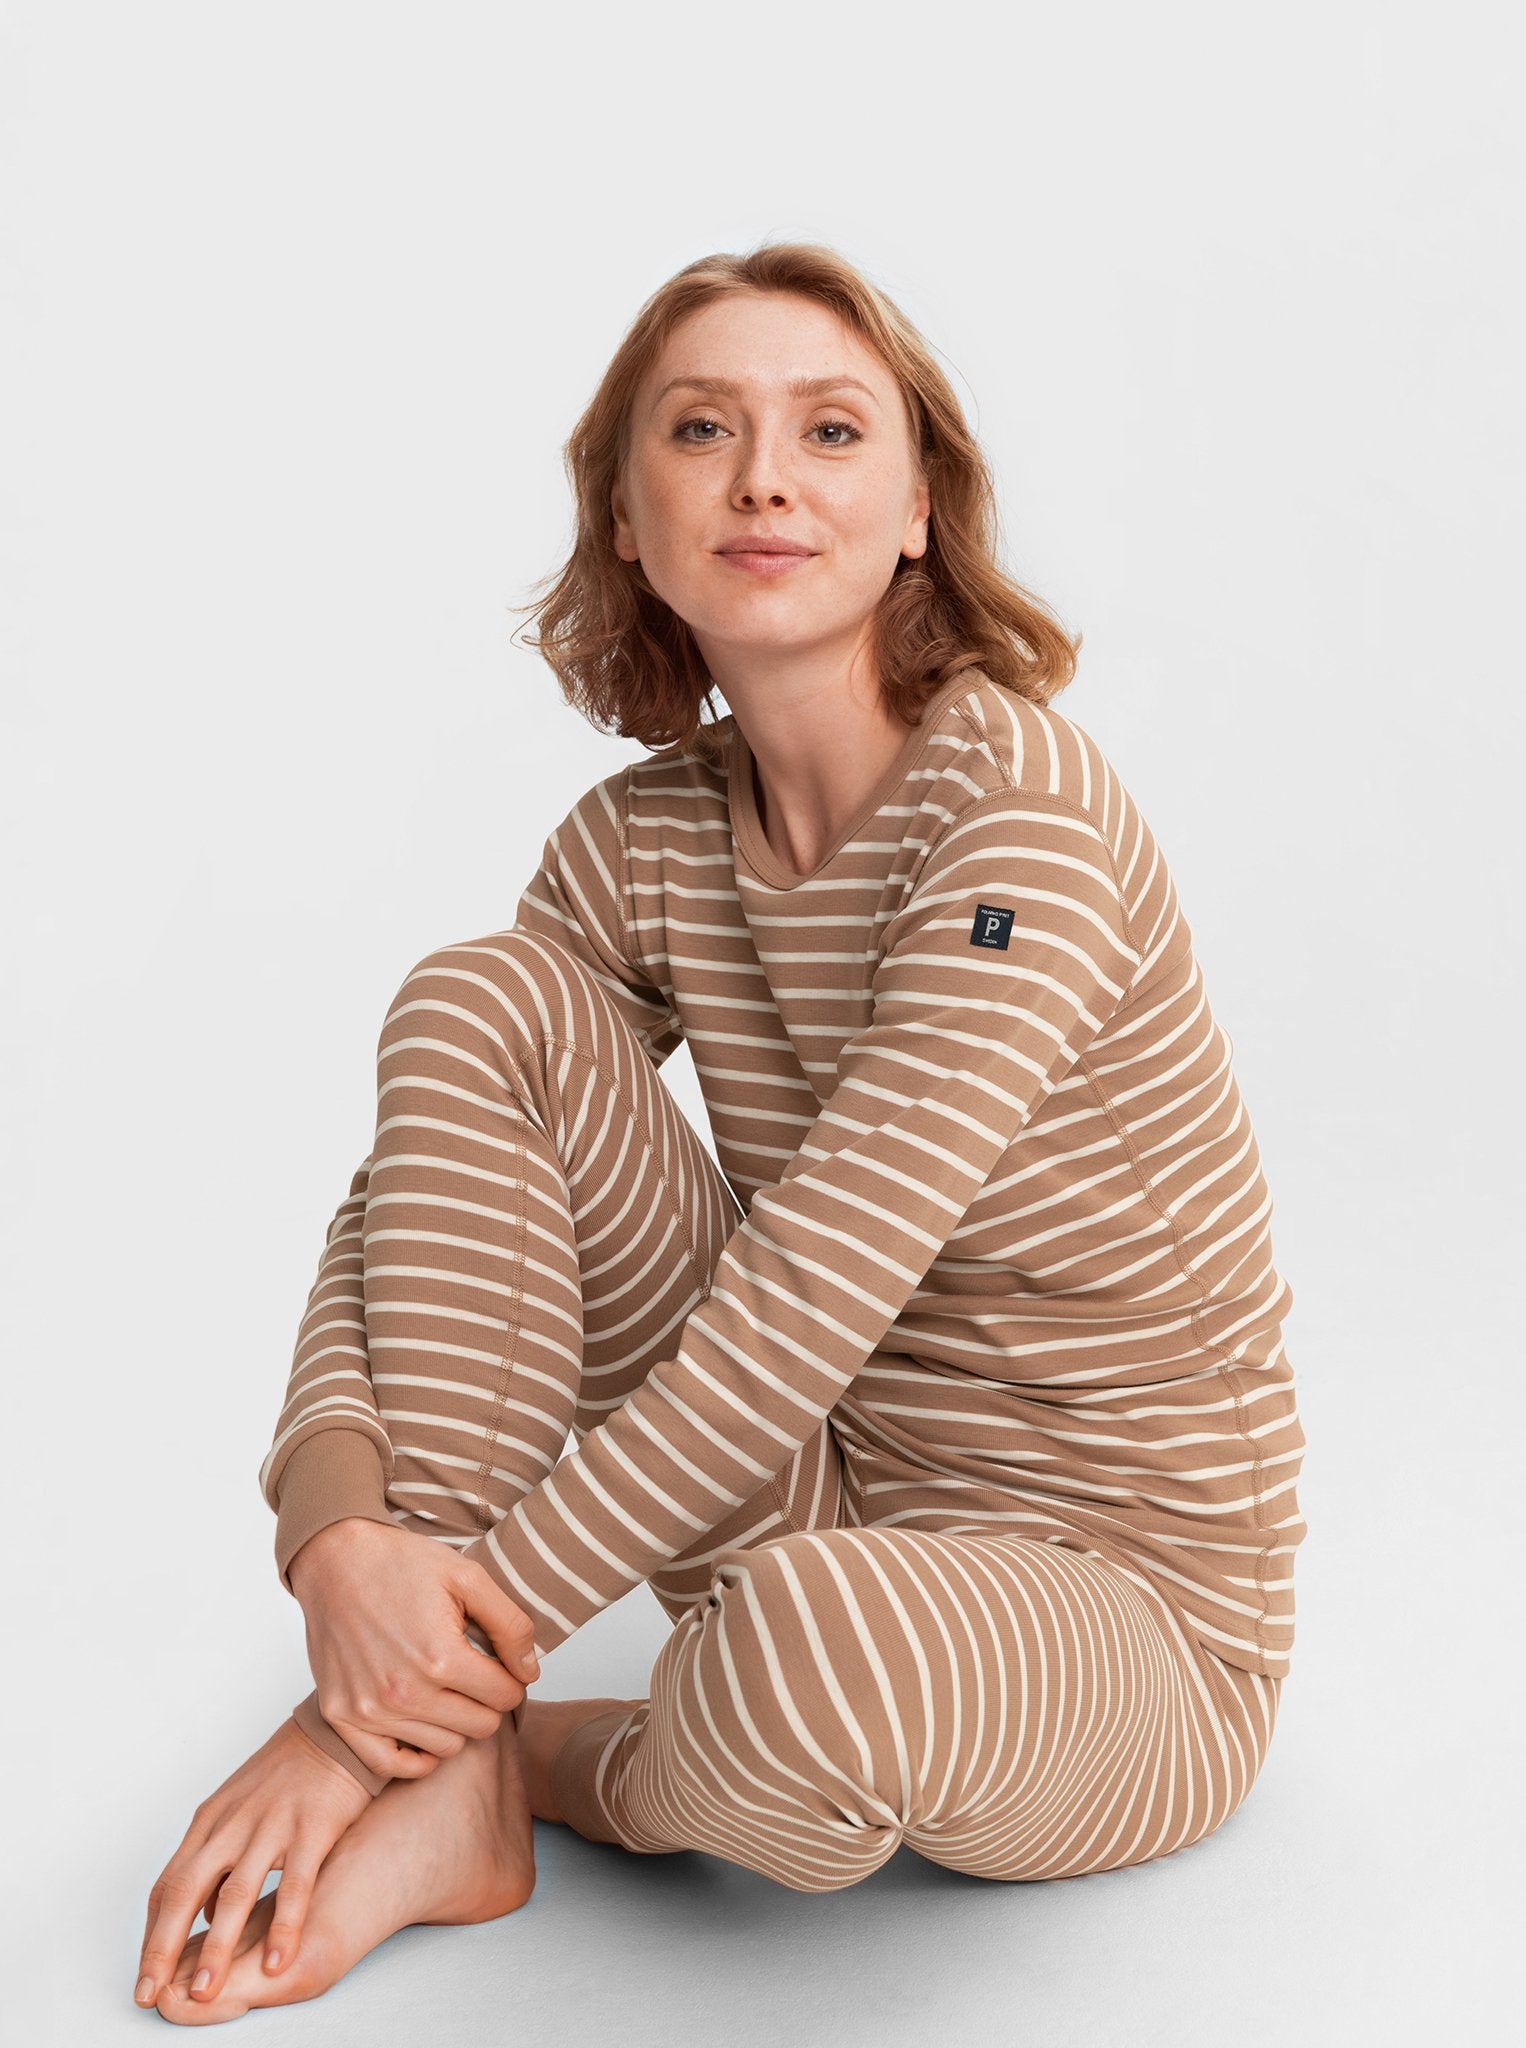  Oganic Striped Brown Adult Pyjamas from Polarn O. Pyret Kidswear. Made with 100% organic cotton.